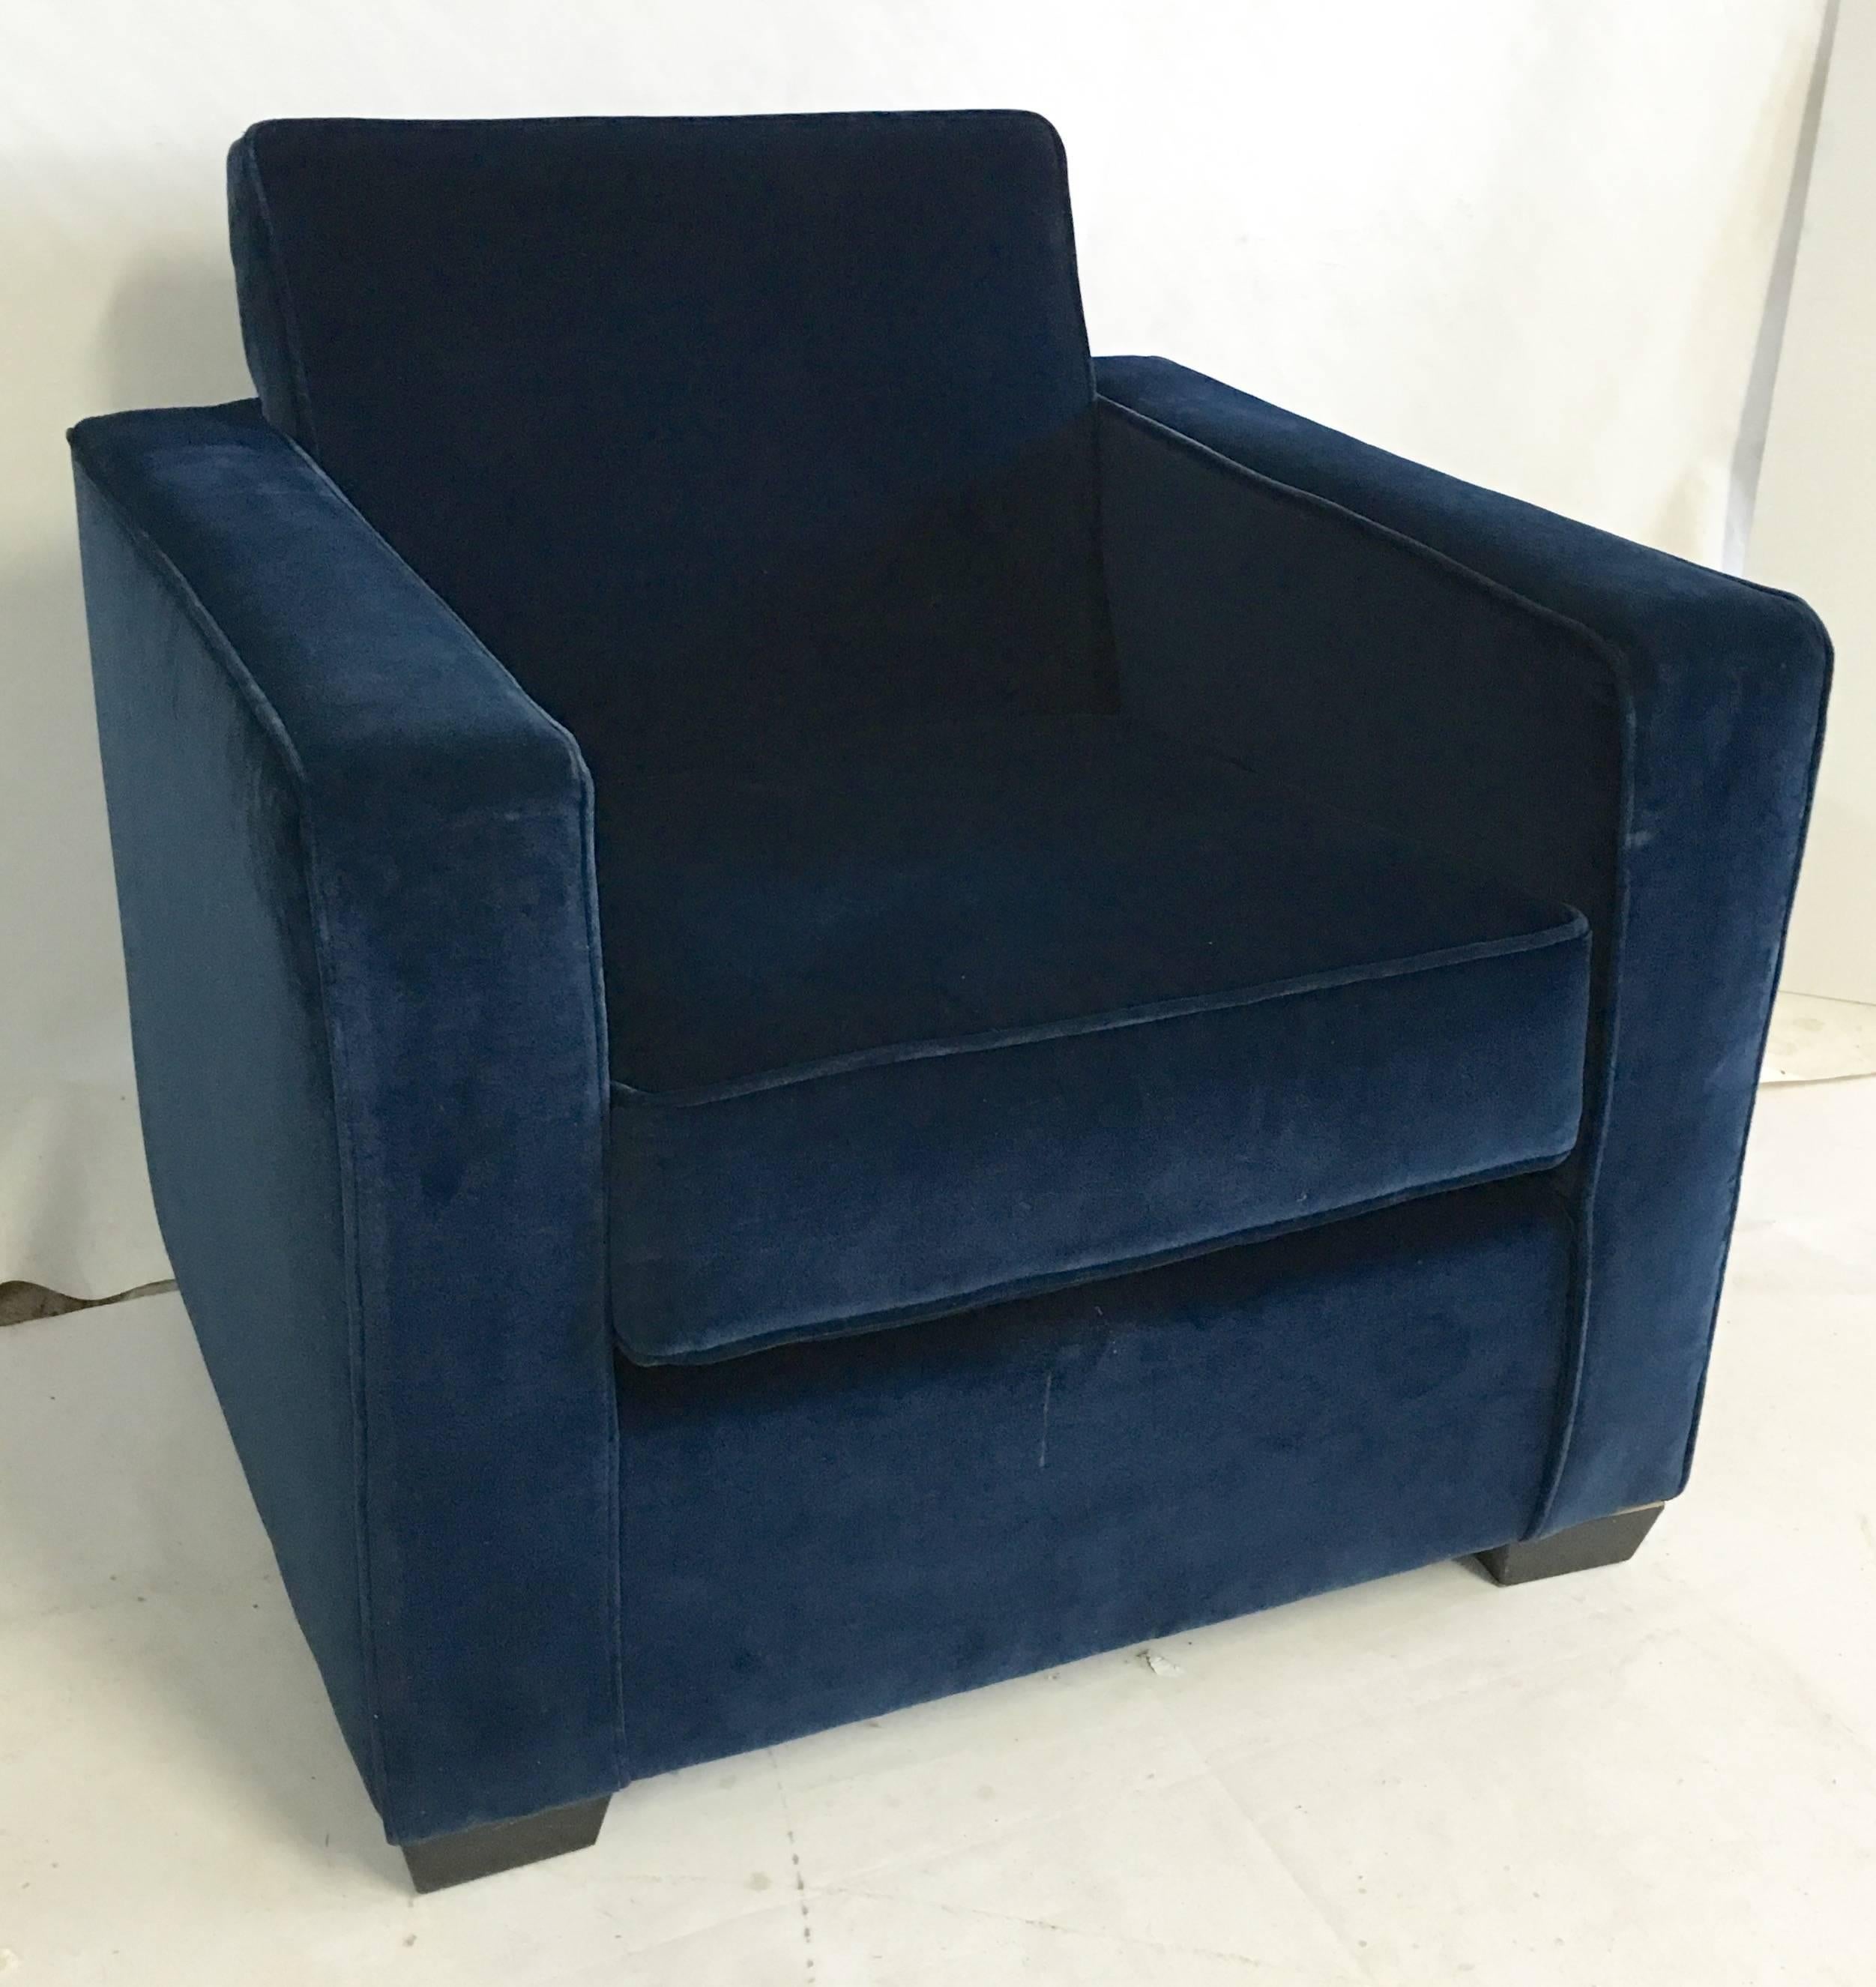 20th Century Ralph Lauren Art Deco style blue velvet club chair by Ralph Lauren Home. Features Ralph Lauren construction spring down seat cushion and ebonized square wood feet. Seat depth, 21" inches, seat height, 18" inches. Fabric by